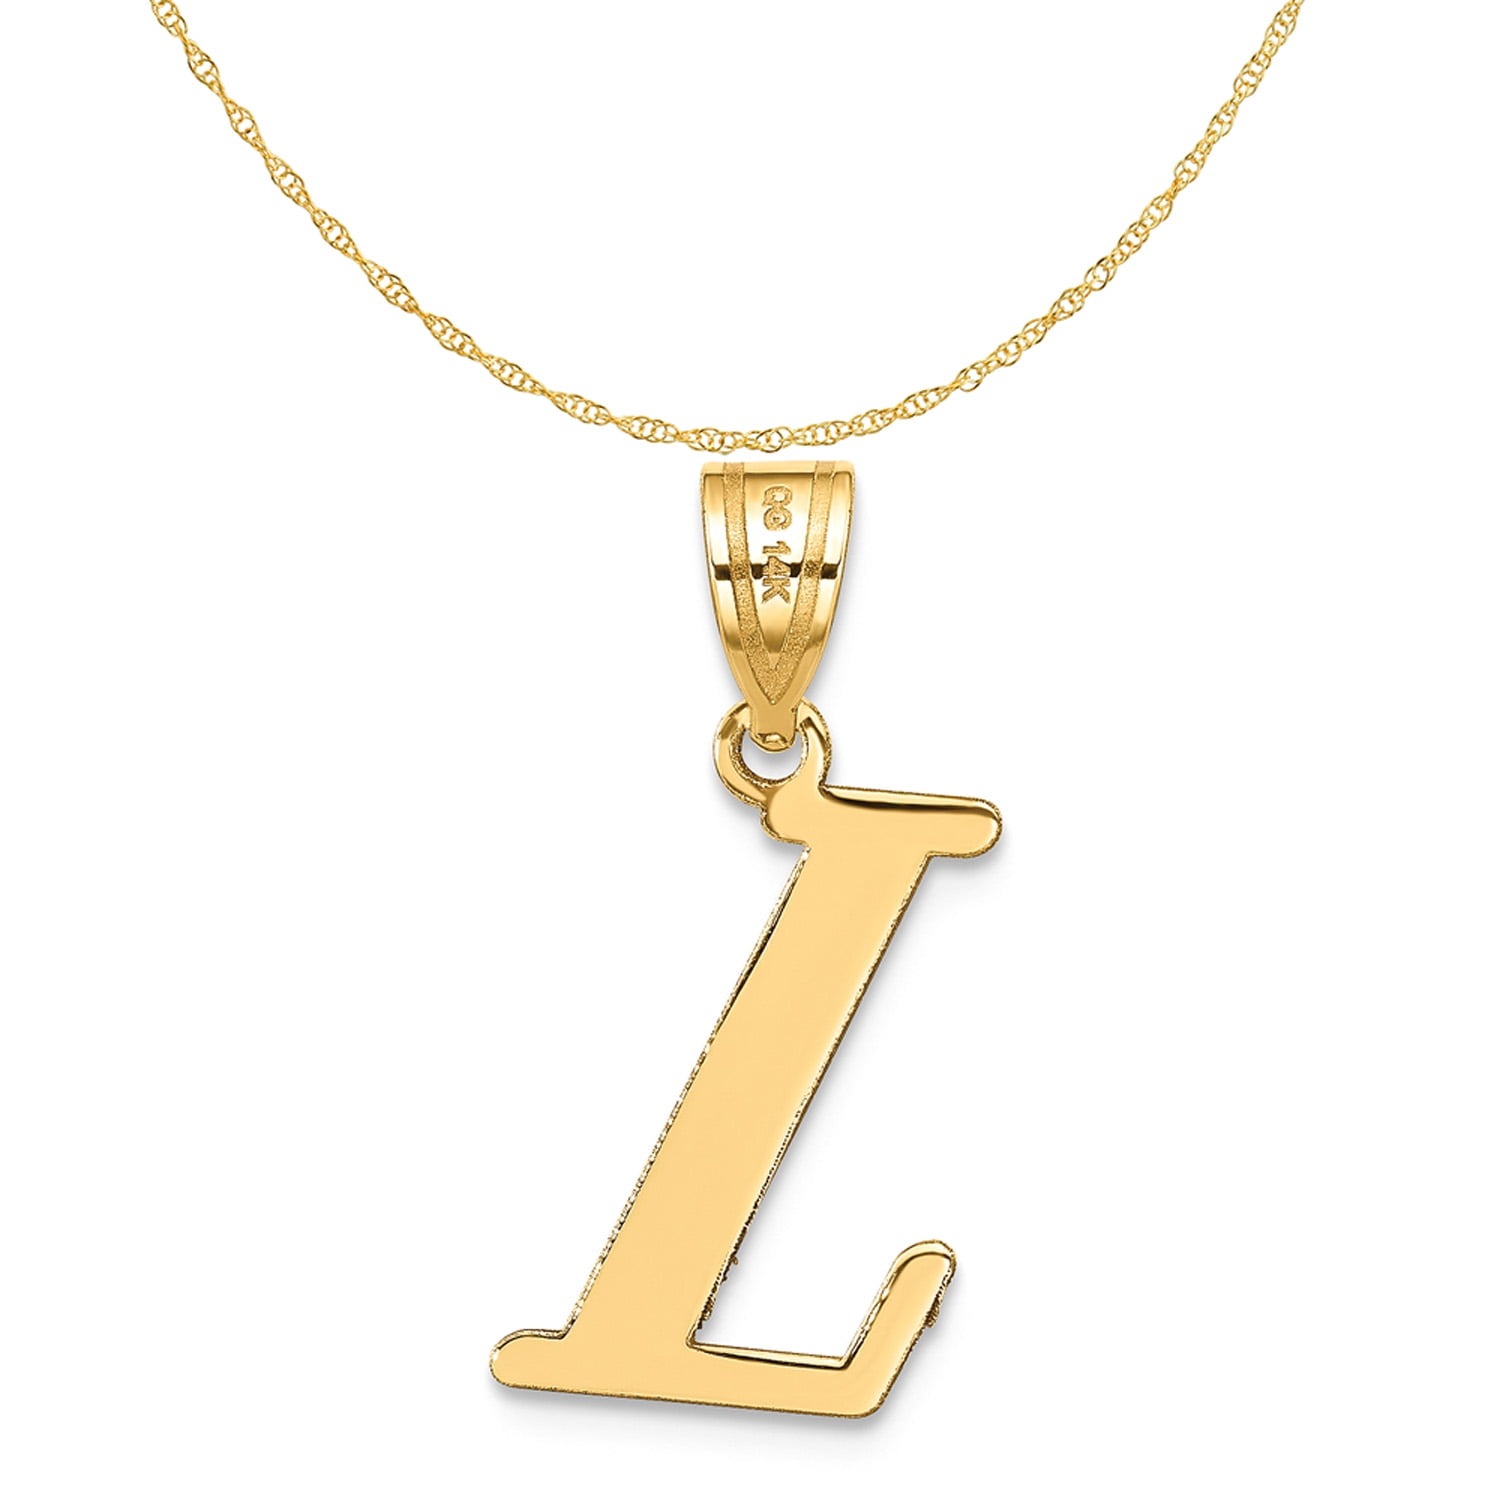 Buy Amaal Valentine Gifts Gold American Diamond Alphabet Letter 'L' Necklace  Pendant for Women Girls boys Men with Chain PS0334 at Amazon.in